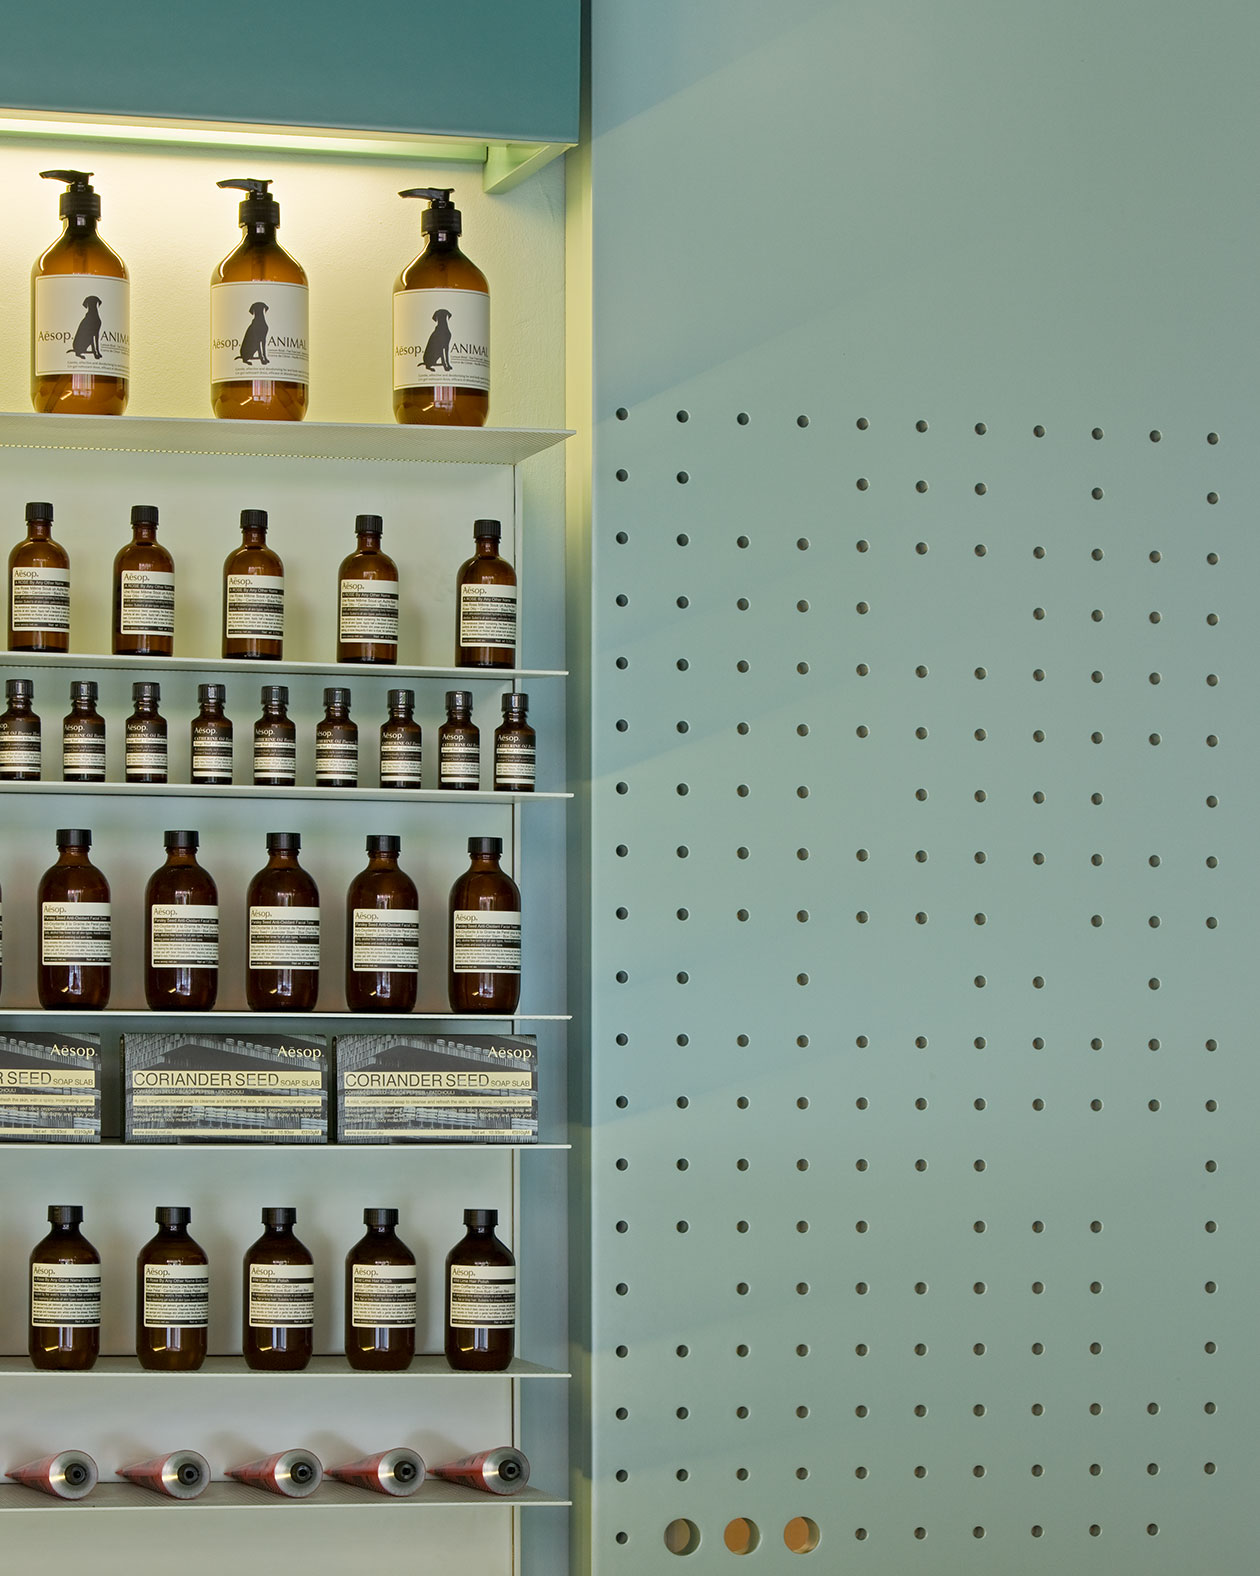 A close up of one of the product display shelves alongside the perforated wall.